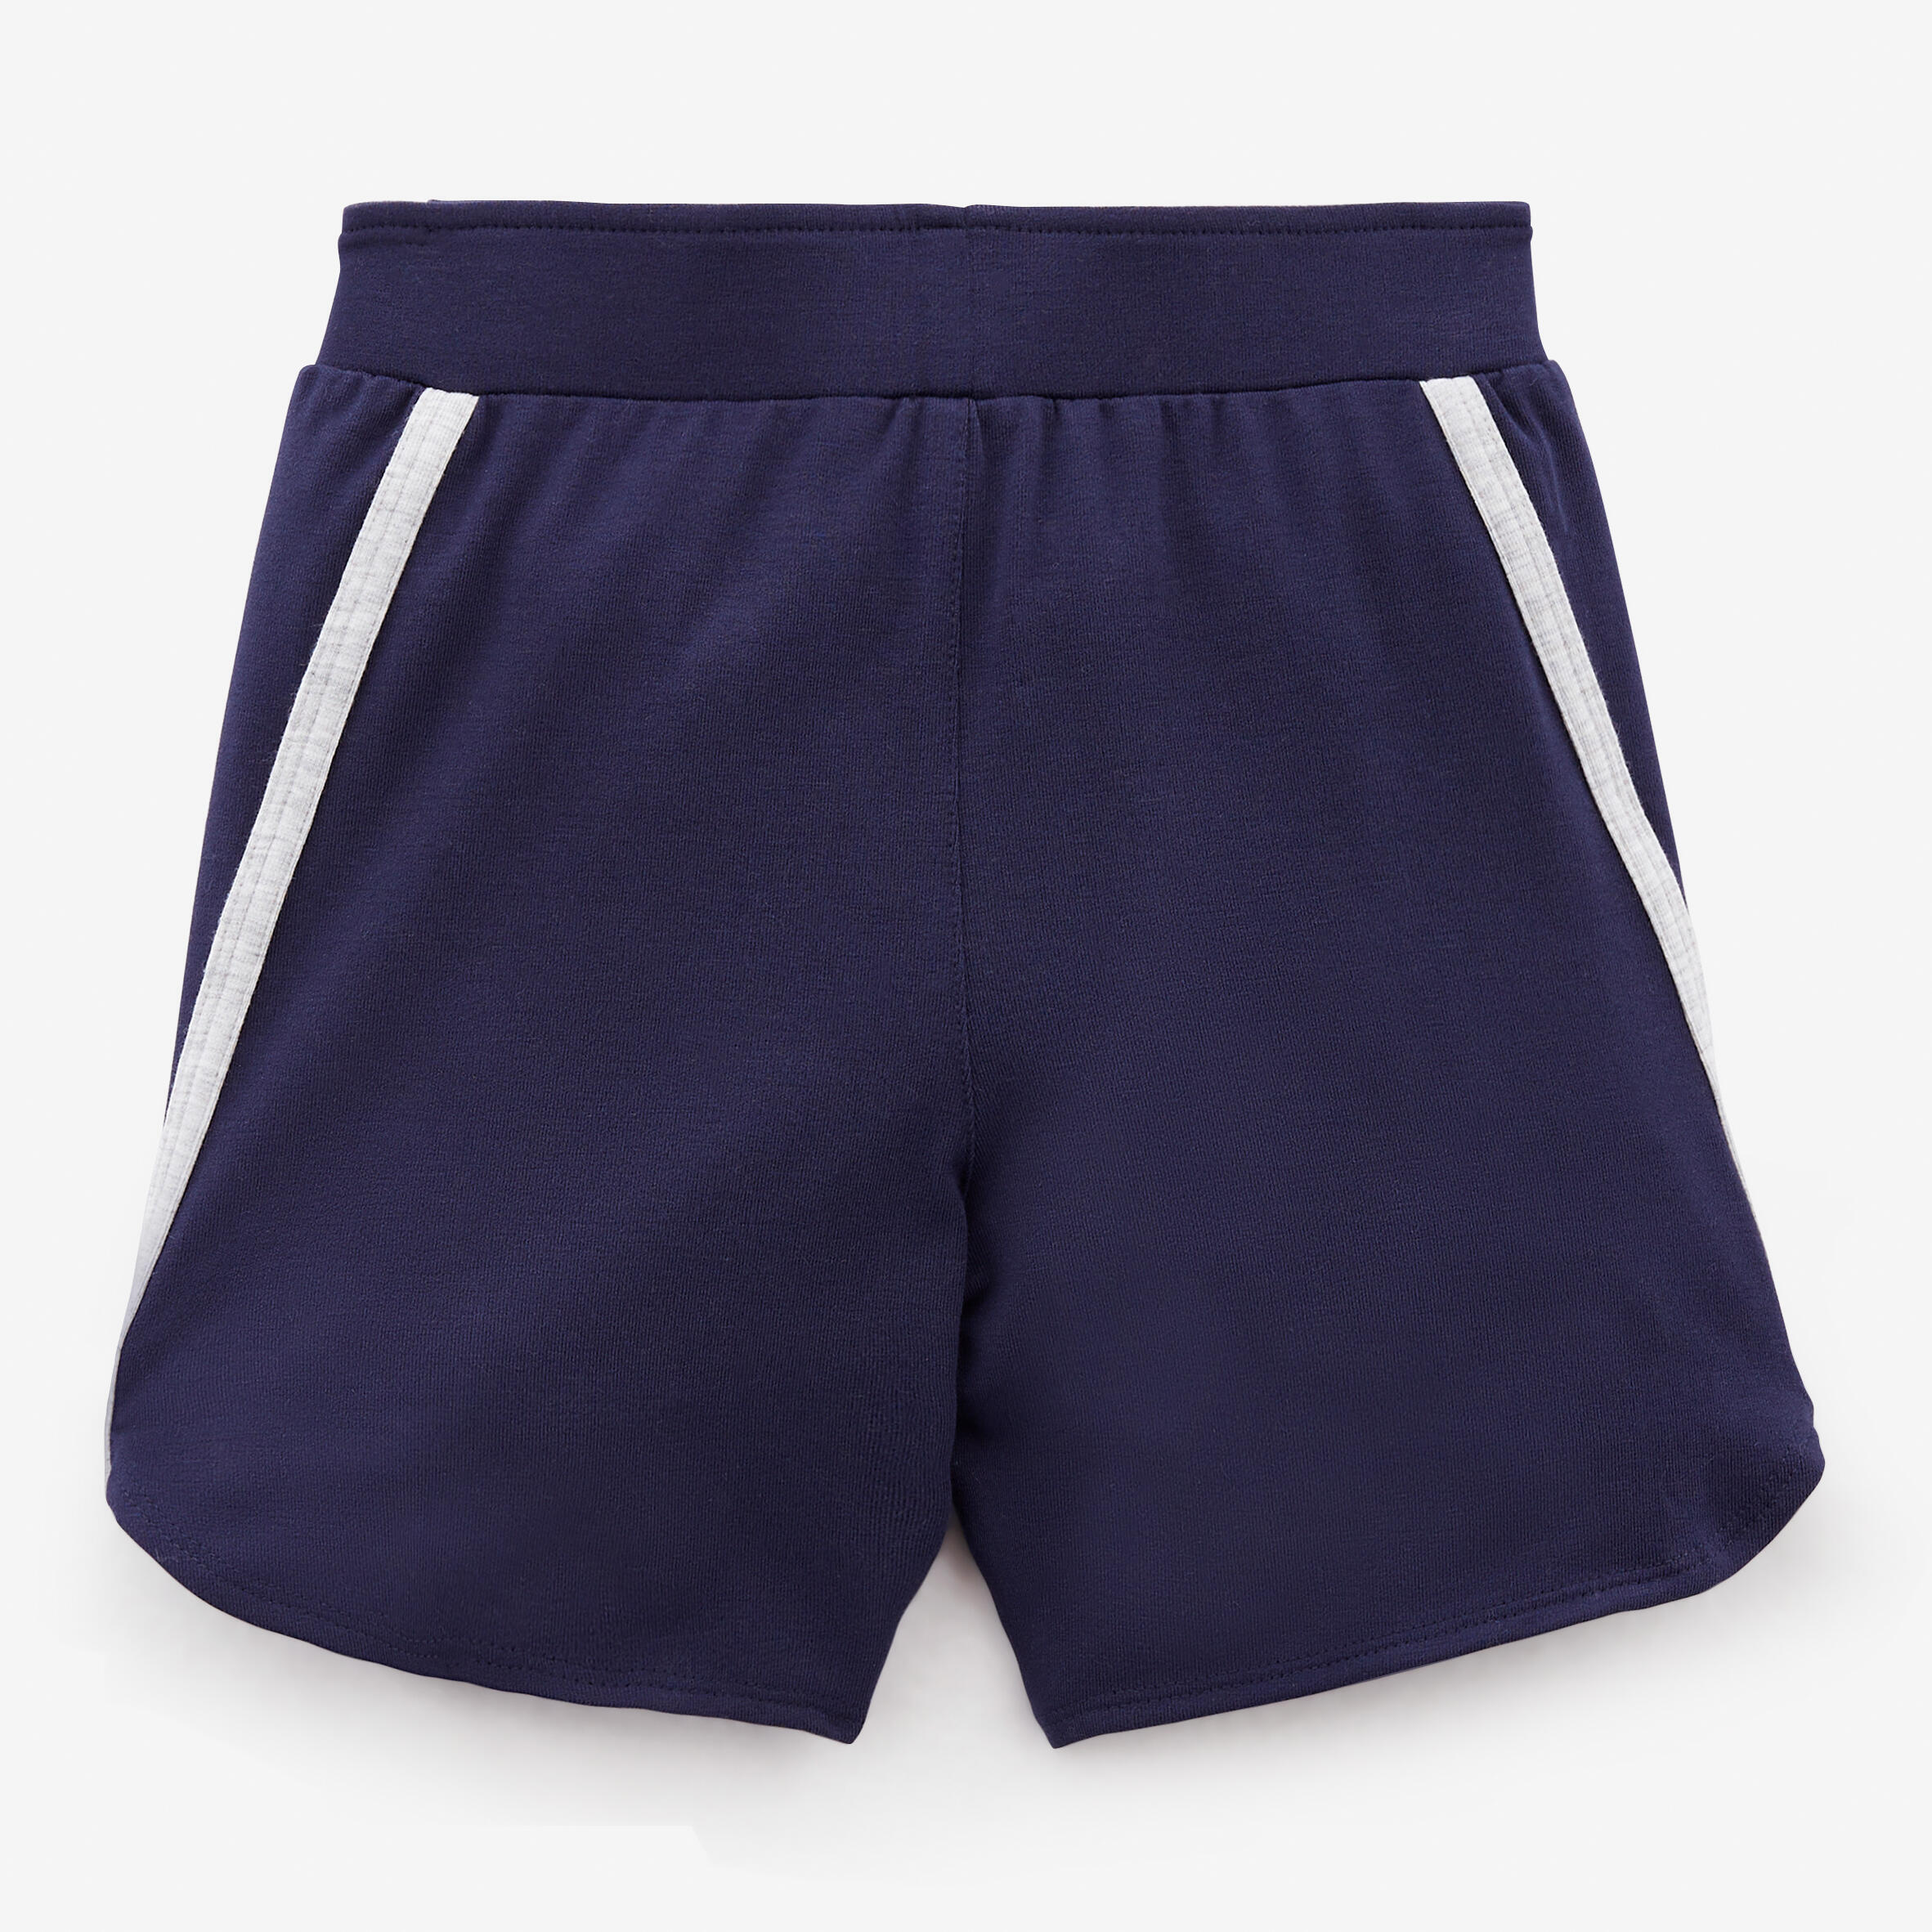 Baby Breathable and Adjustable Shorts 3/4